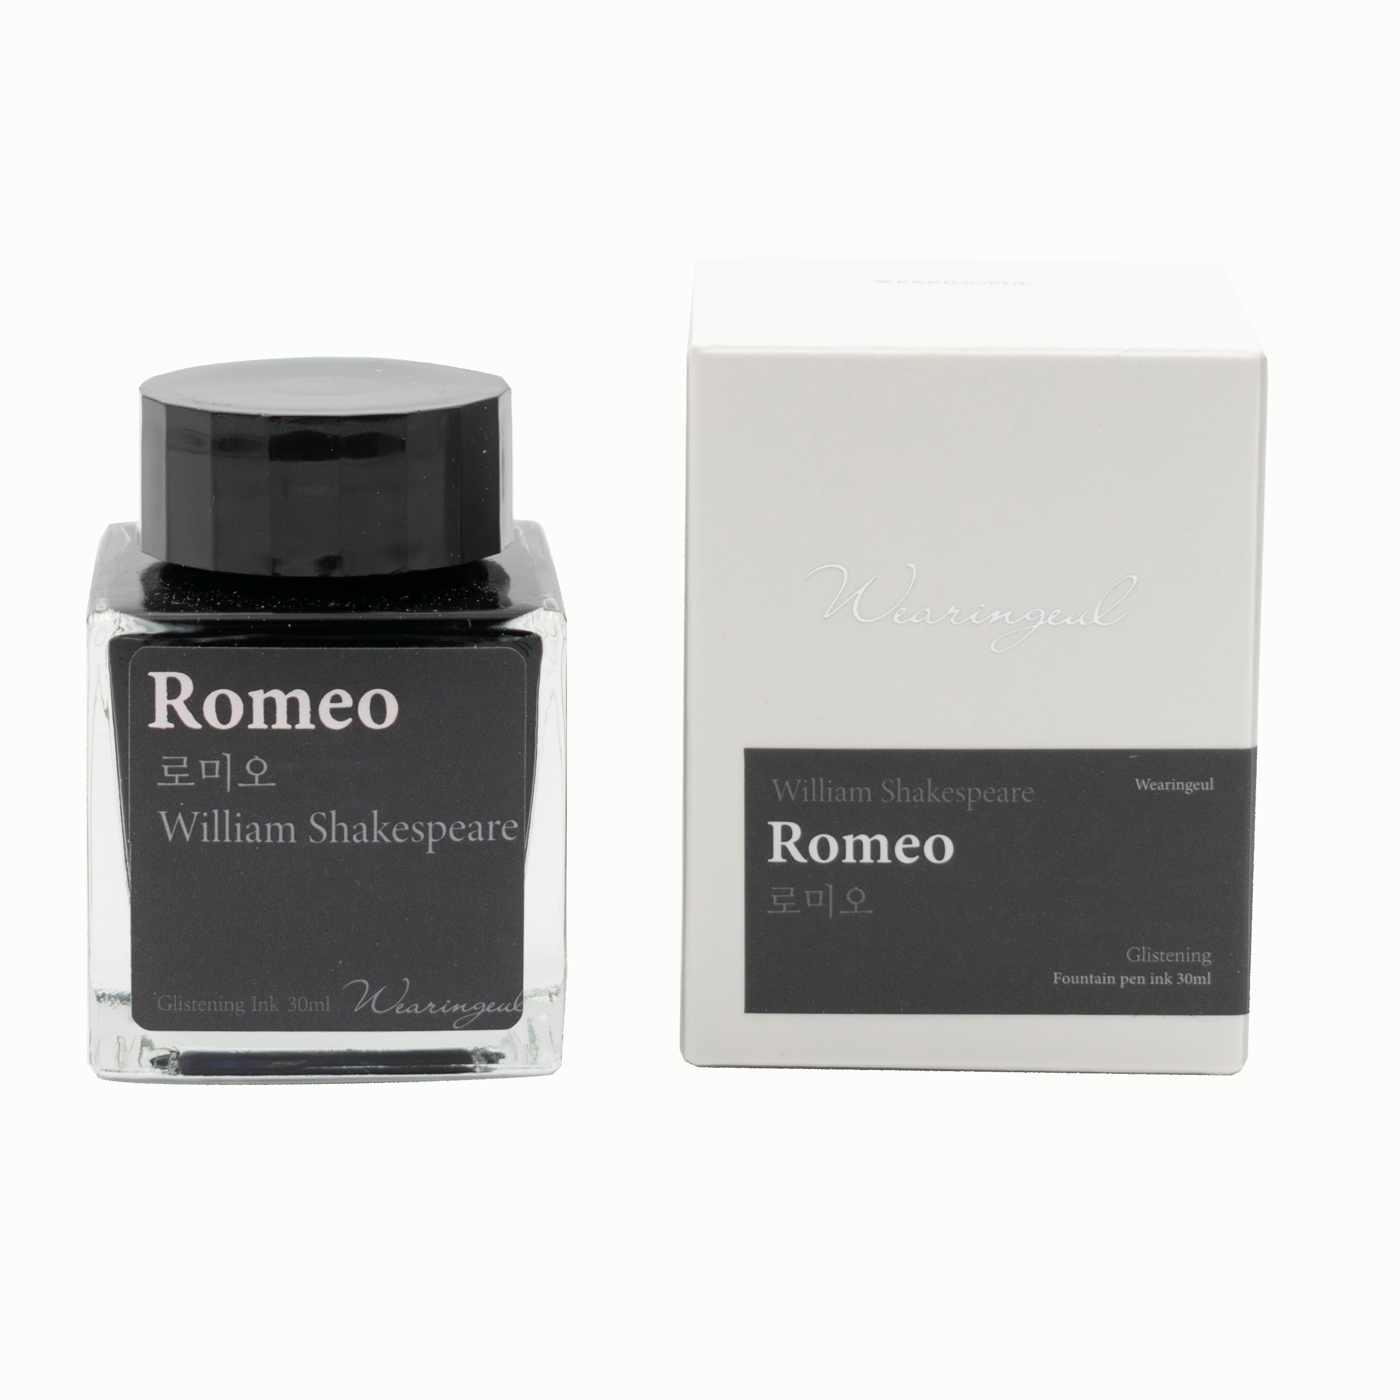 Wearingeul - Monthly World Literature ink Collection - William Shakespeare - Romeo